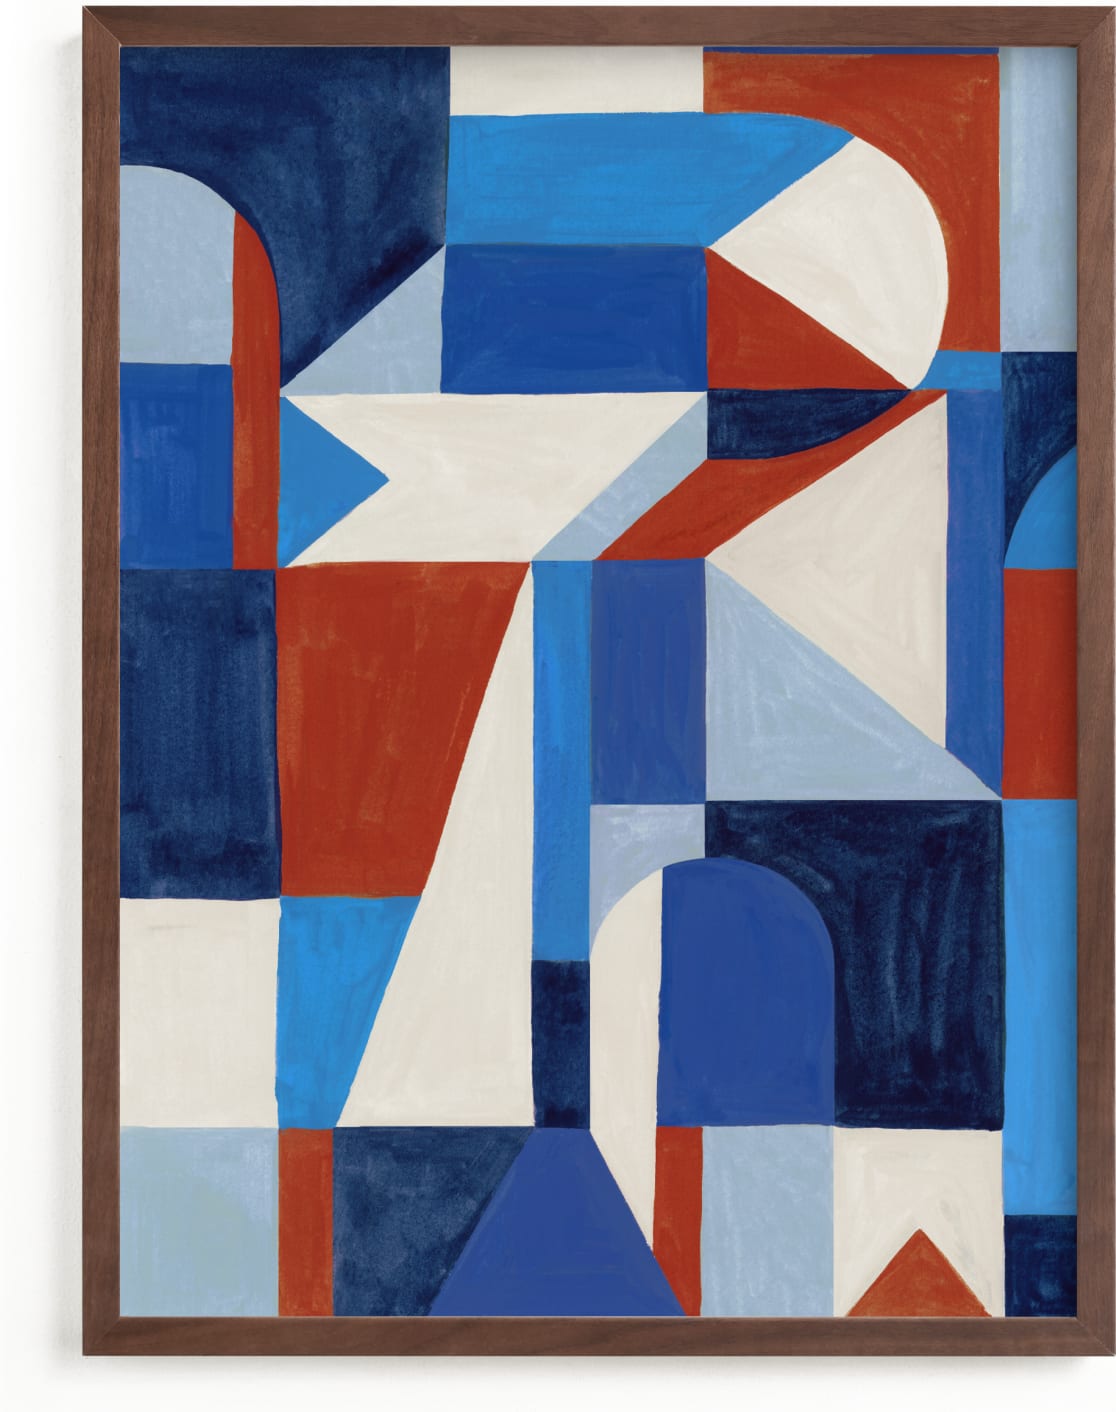 This is a blue, beige, red art by Pati Cascino called Alf.